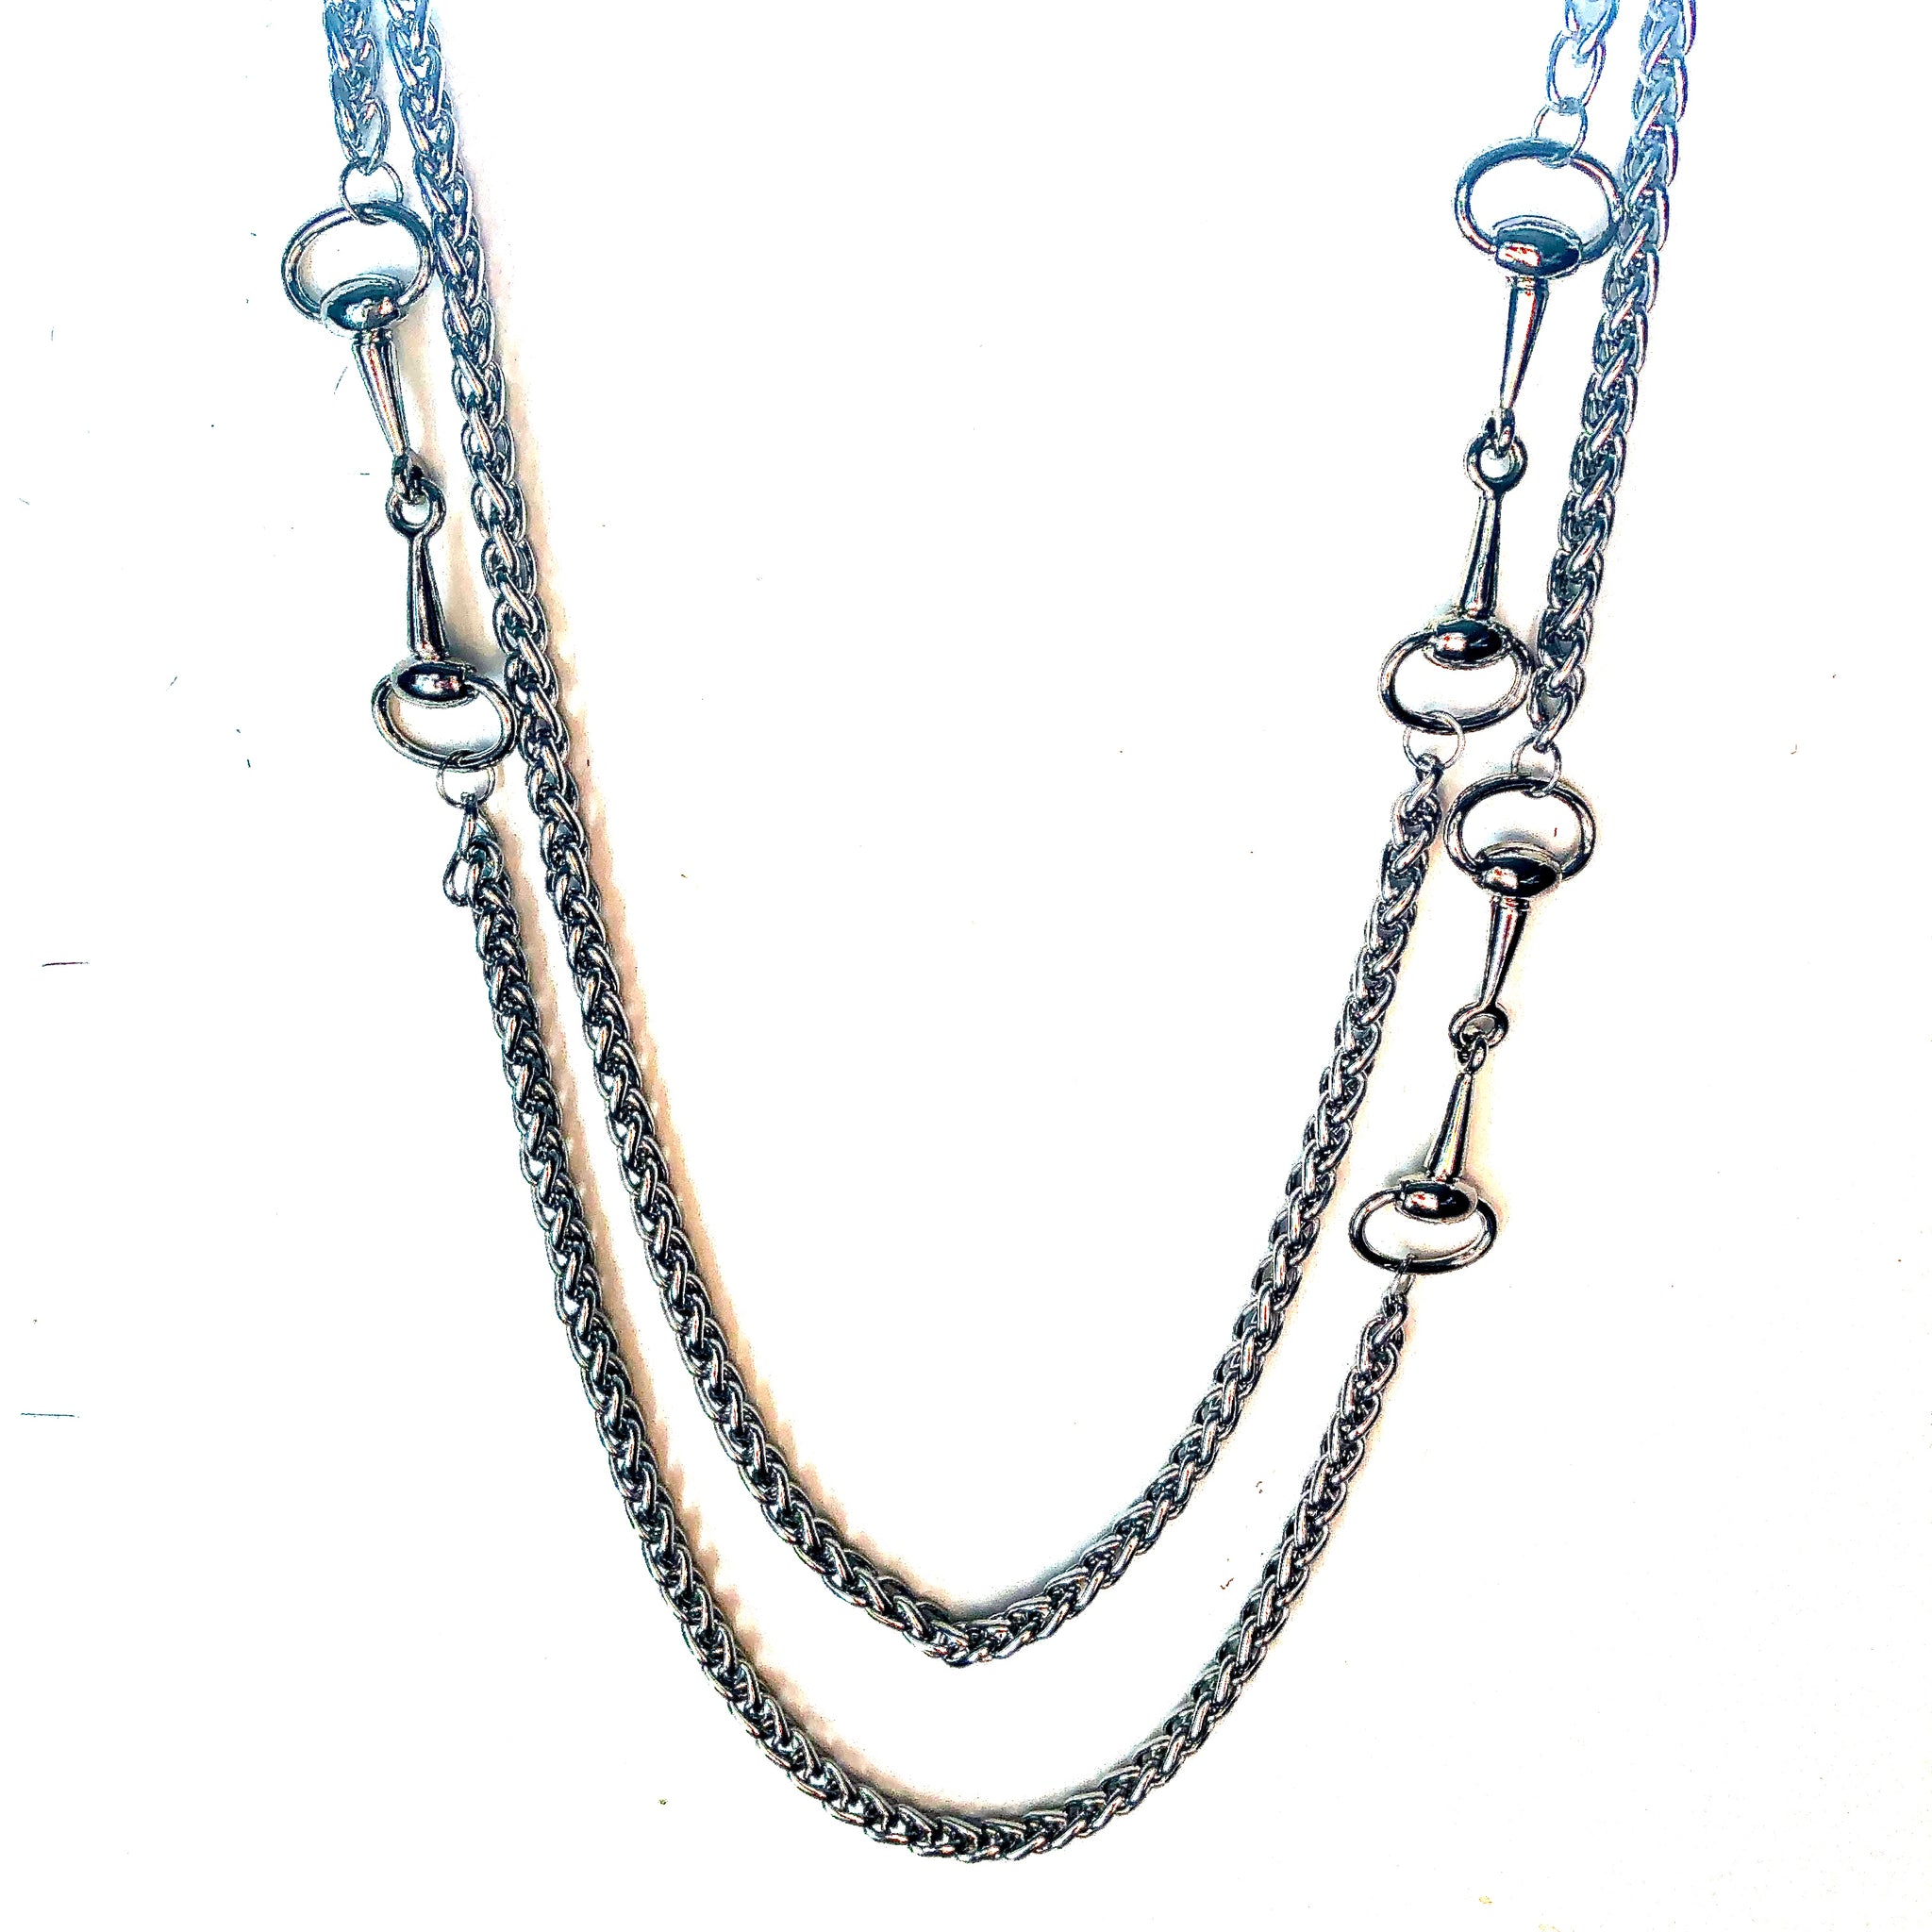 LONG STAINLESS STEEL NECKLACE ADORNED WITH THREE HORSE-BIT ACCENT HARDWARE. by nyet jewelry.